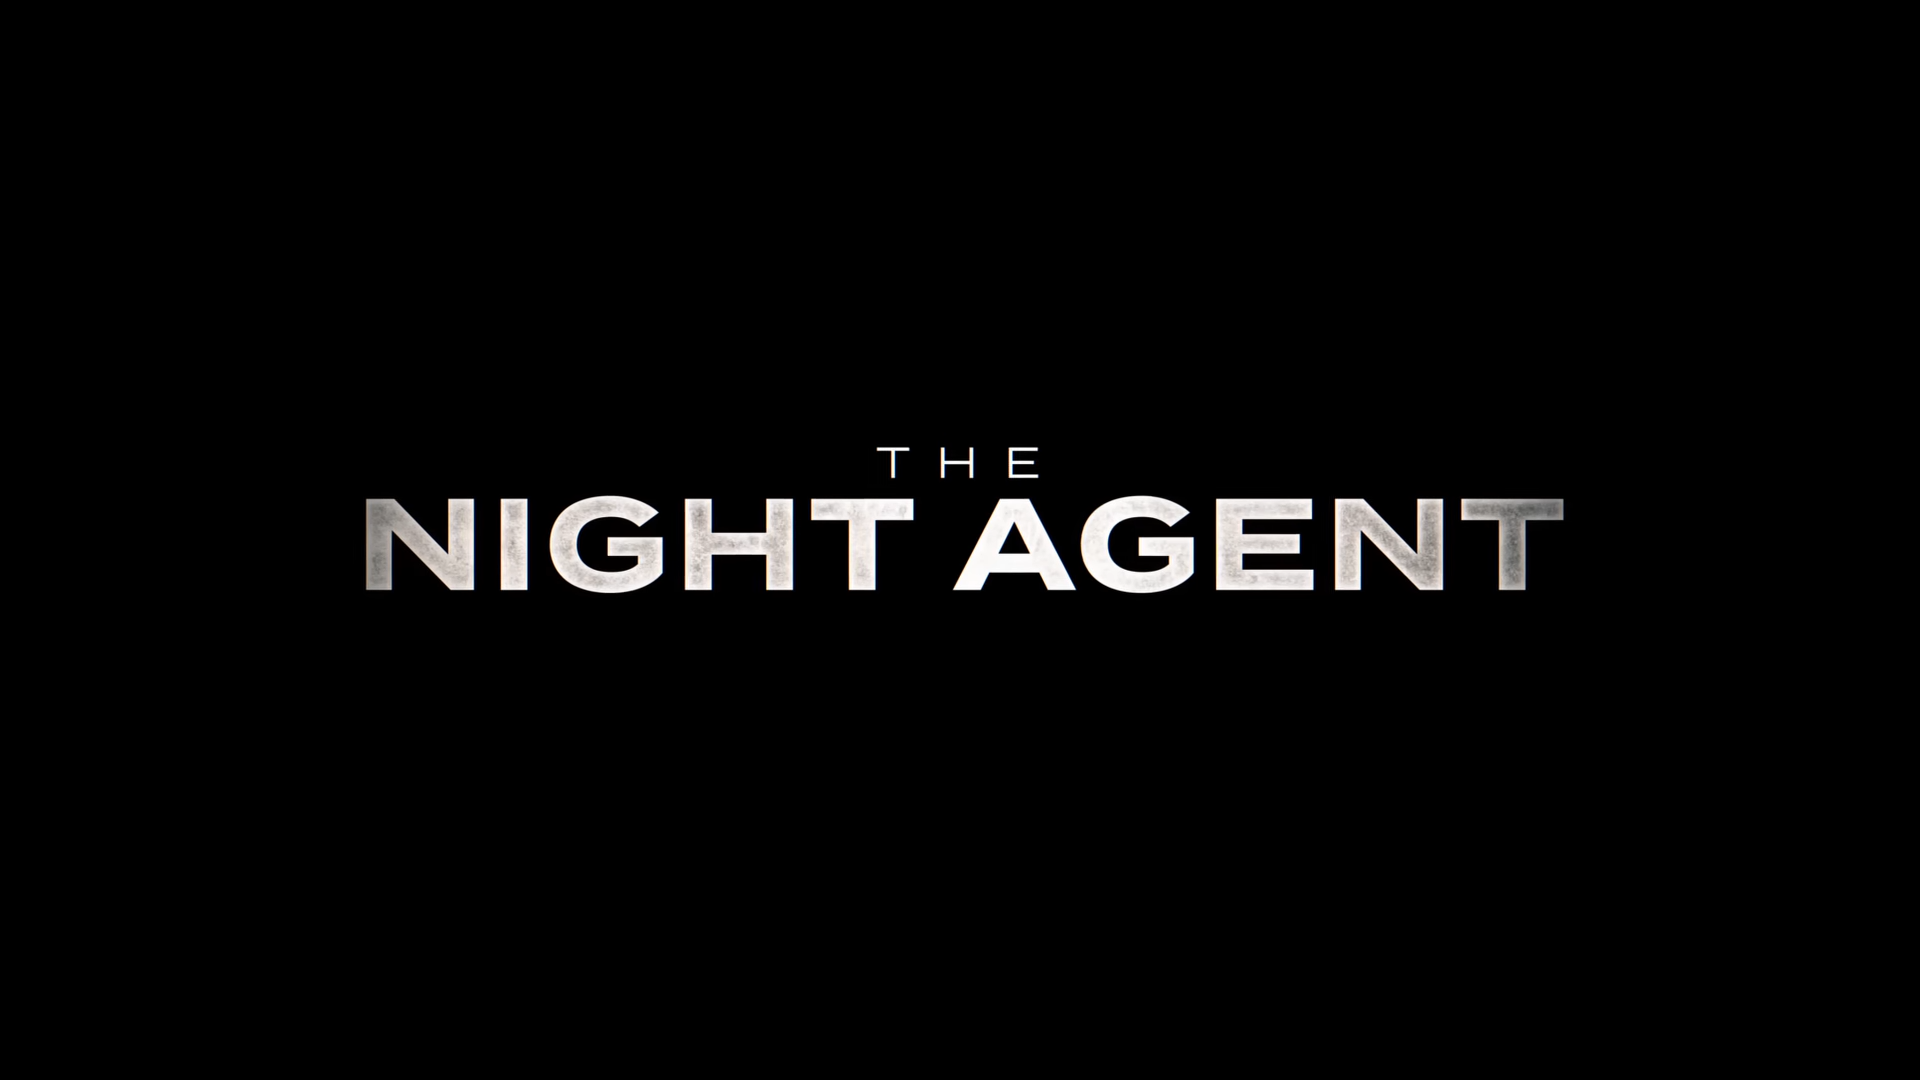 The Night Agent, Official Teaser